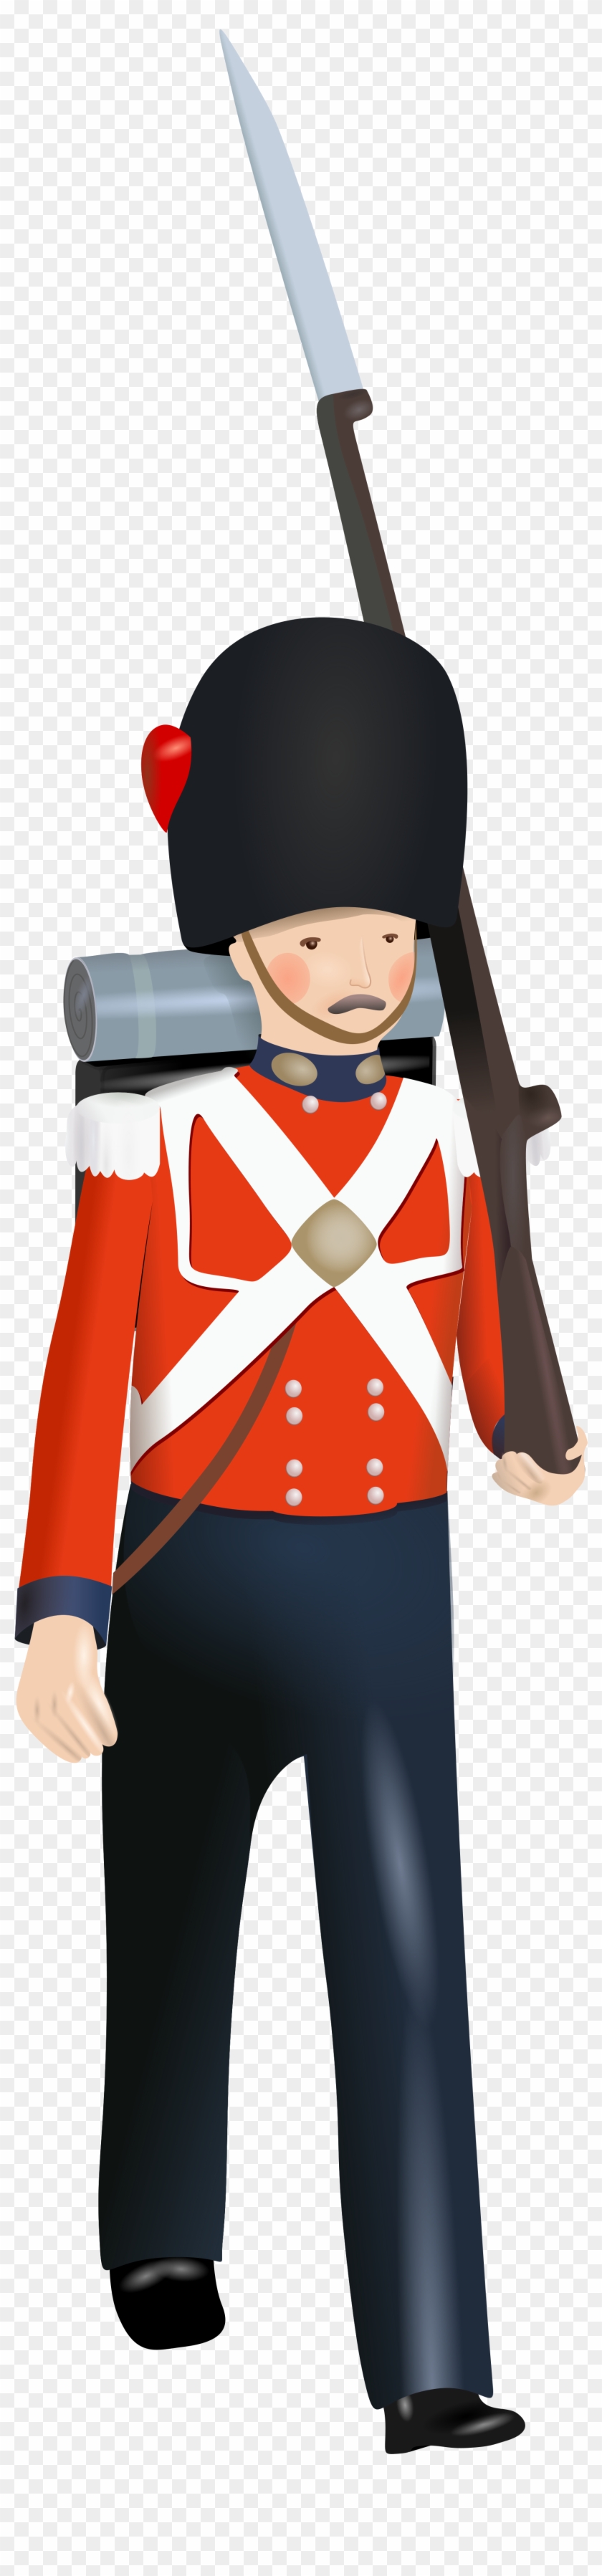 Open - English Soldier Png #1338164